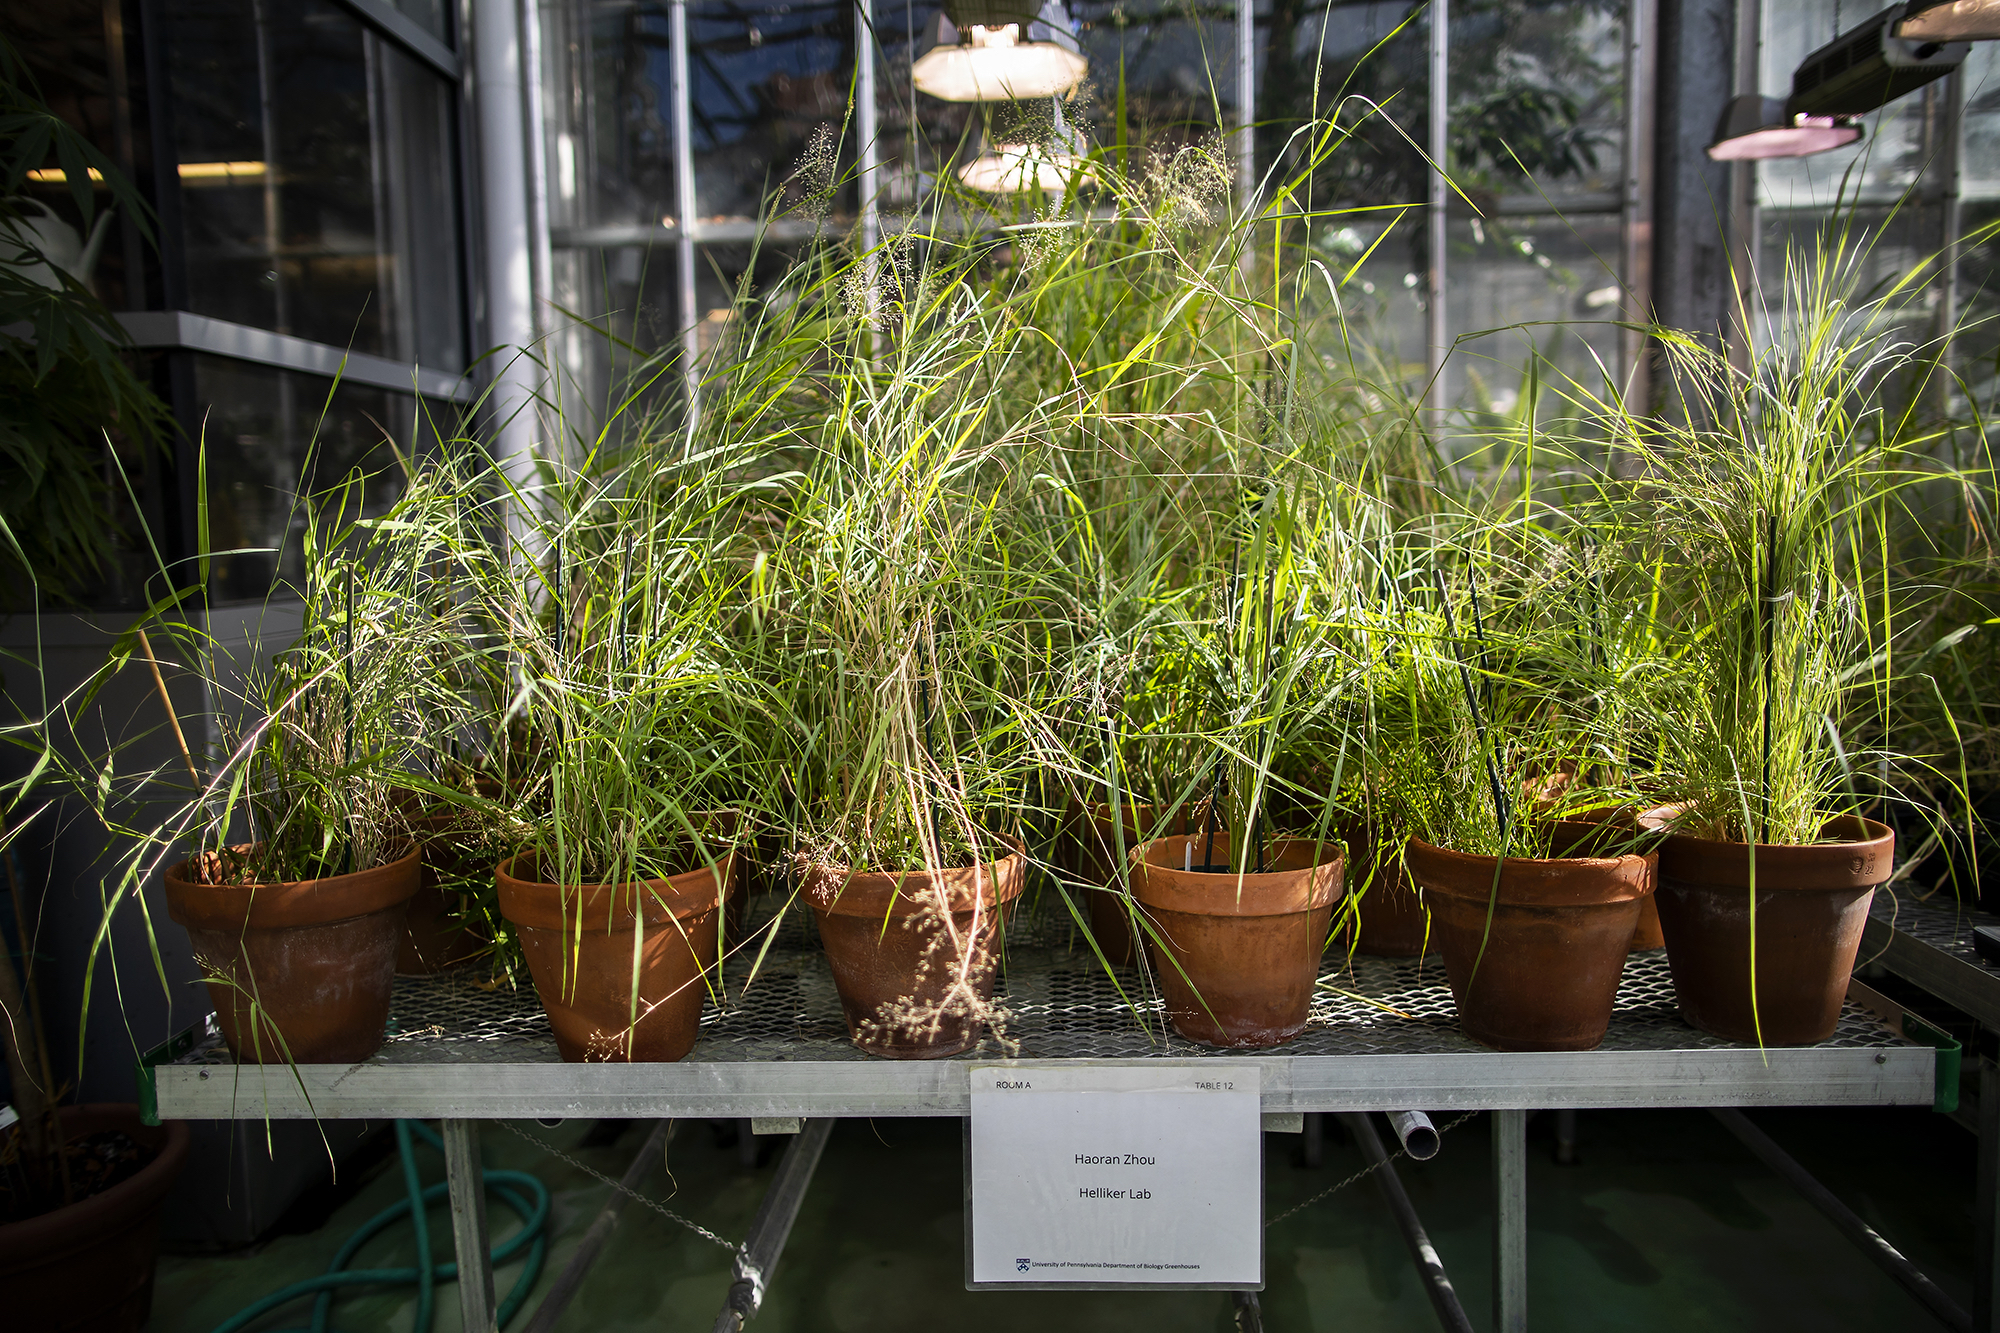 Grasses growing on pots on a table in a greenhouse. The table is labeled with a sign that says "Haoran Zhou, Helliker lab."